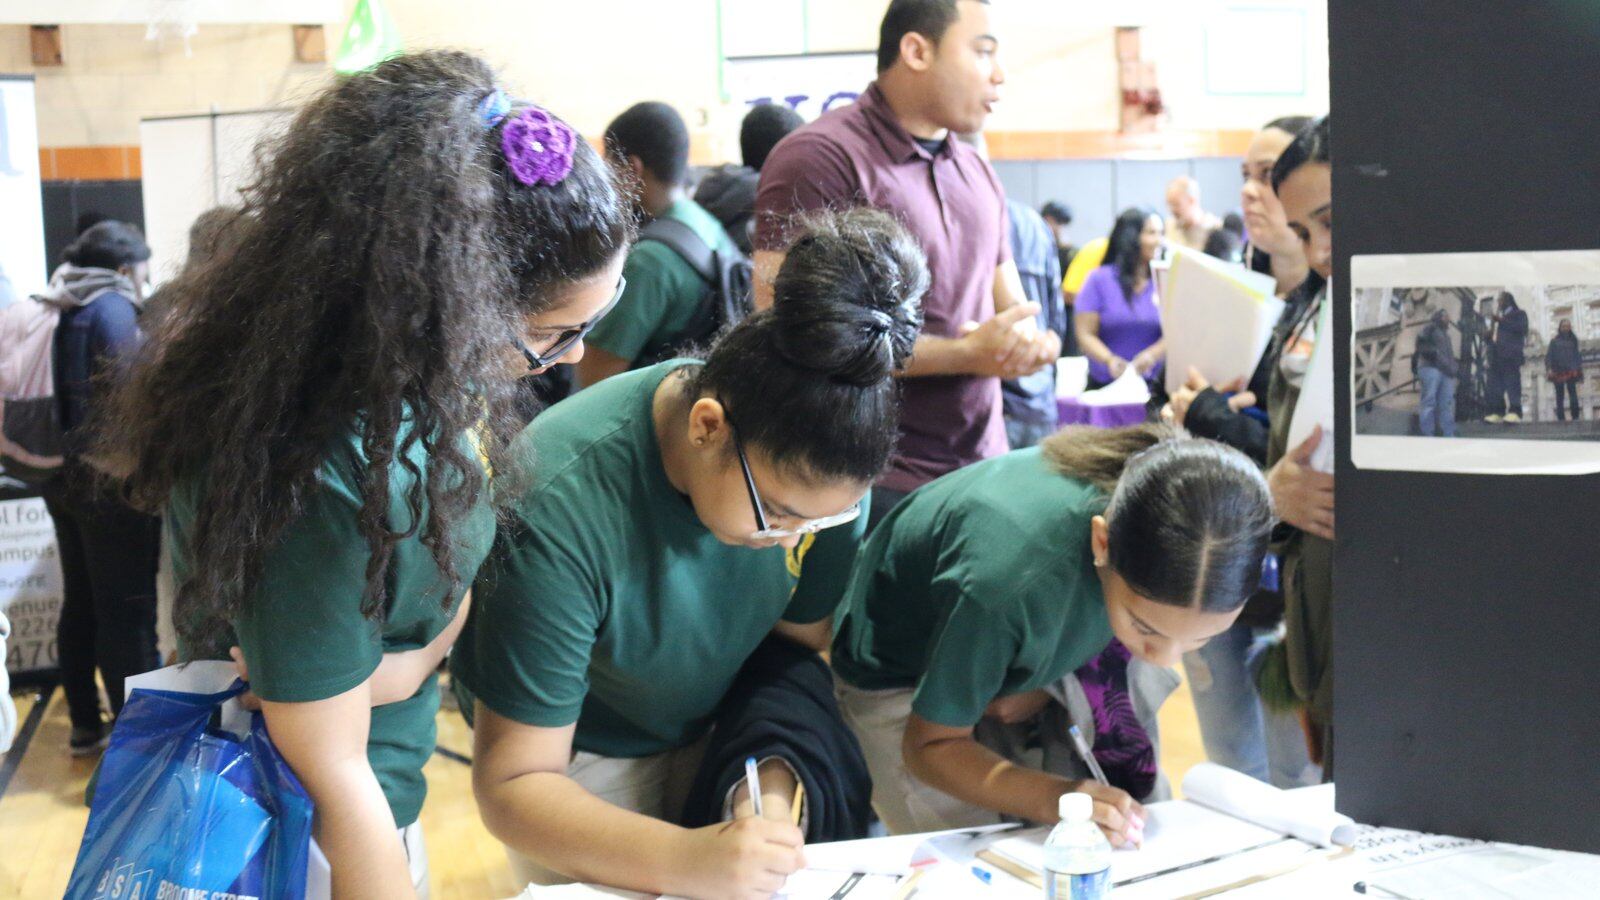 Middle school students write their names down at a high school fair in Brooklyn in 2016.